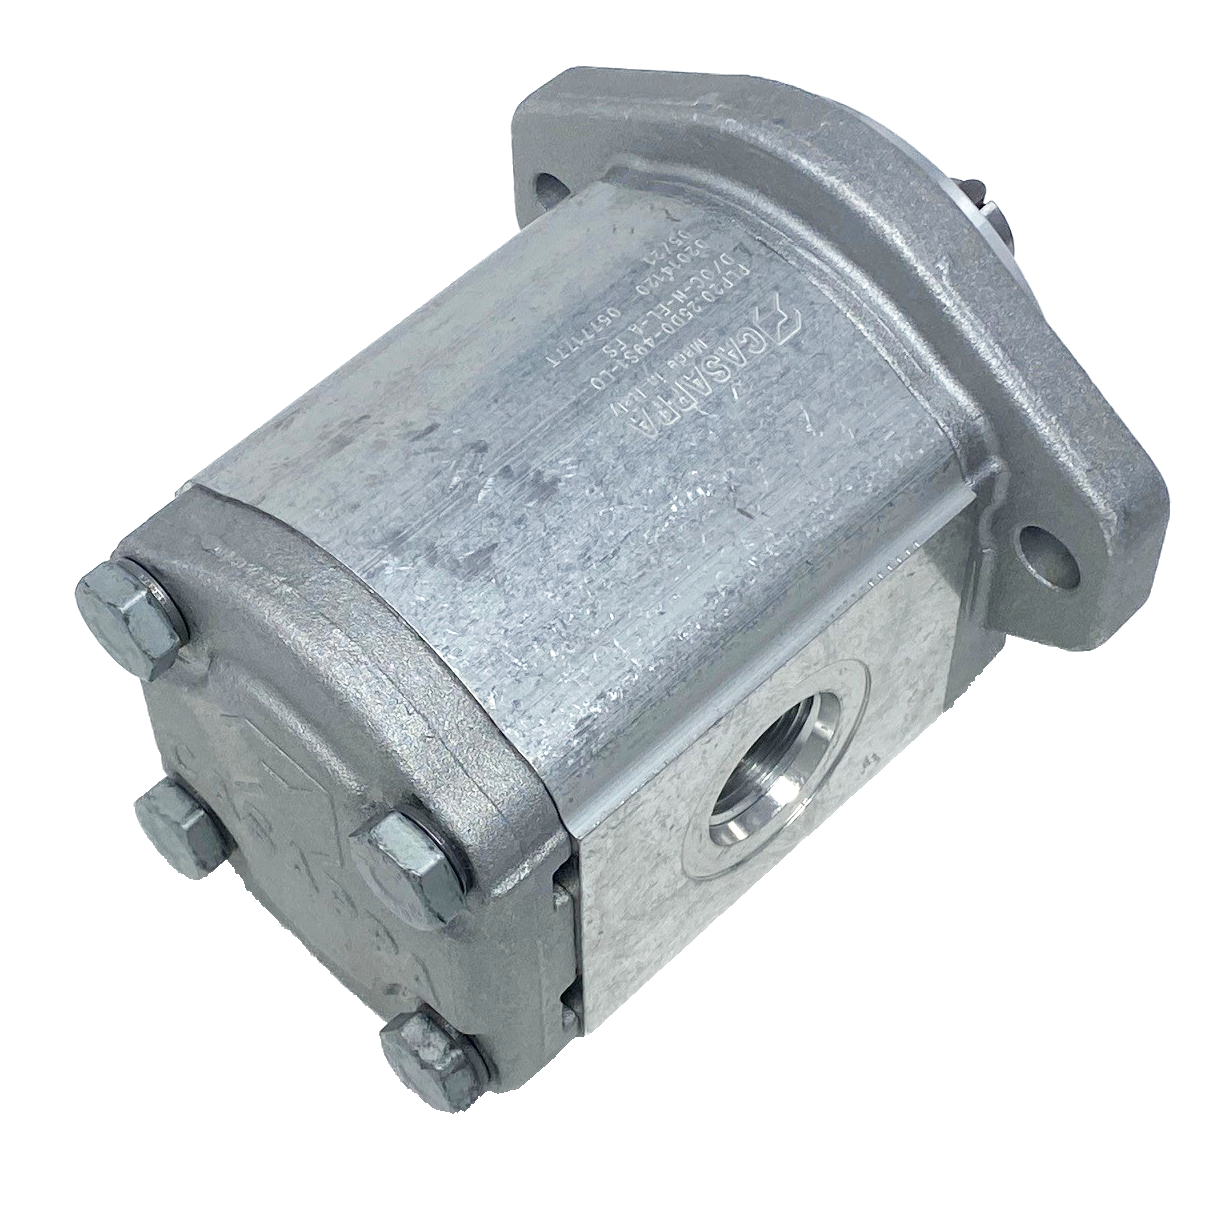 PHP20.31,5S0-50S9-LOG/OC-N-EL : Casappa Polaris Gear Pump, 33.03cc, 2900psi Rated, 2500RPM, CCW, 3/4" Bore x 3/16" Key Shaft, SAE A 2-Bolt Flange, 1.25" #20 SAE Inlet, 0.625 (5/8") #10 SAE Outlet, Cast Iron Body, Aluminum Flange